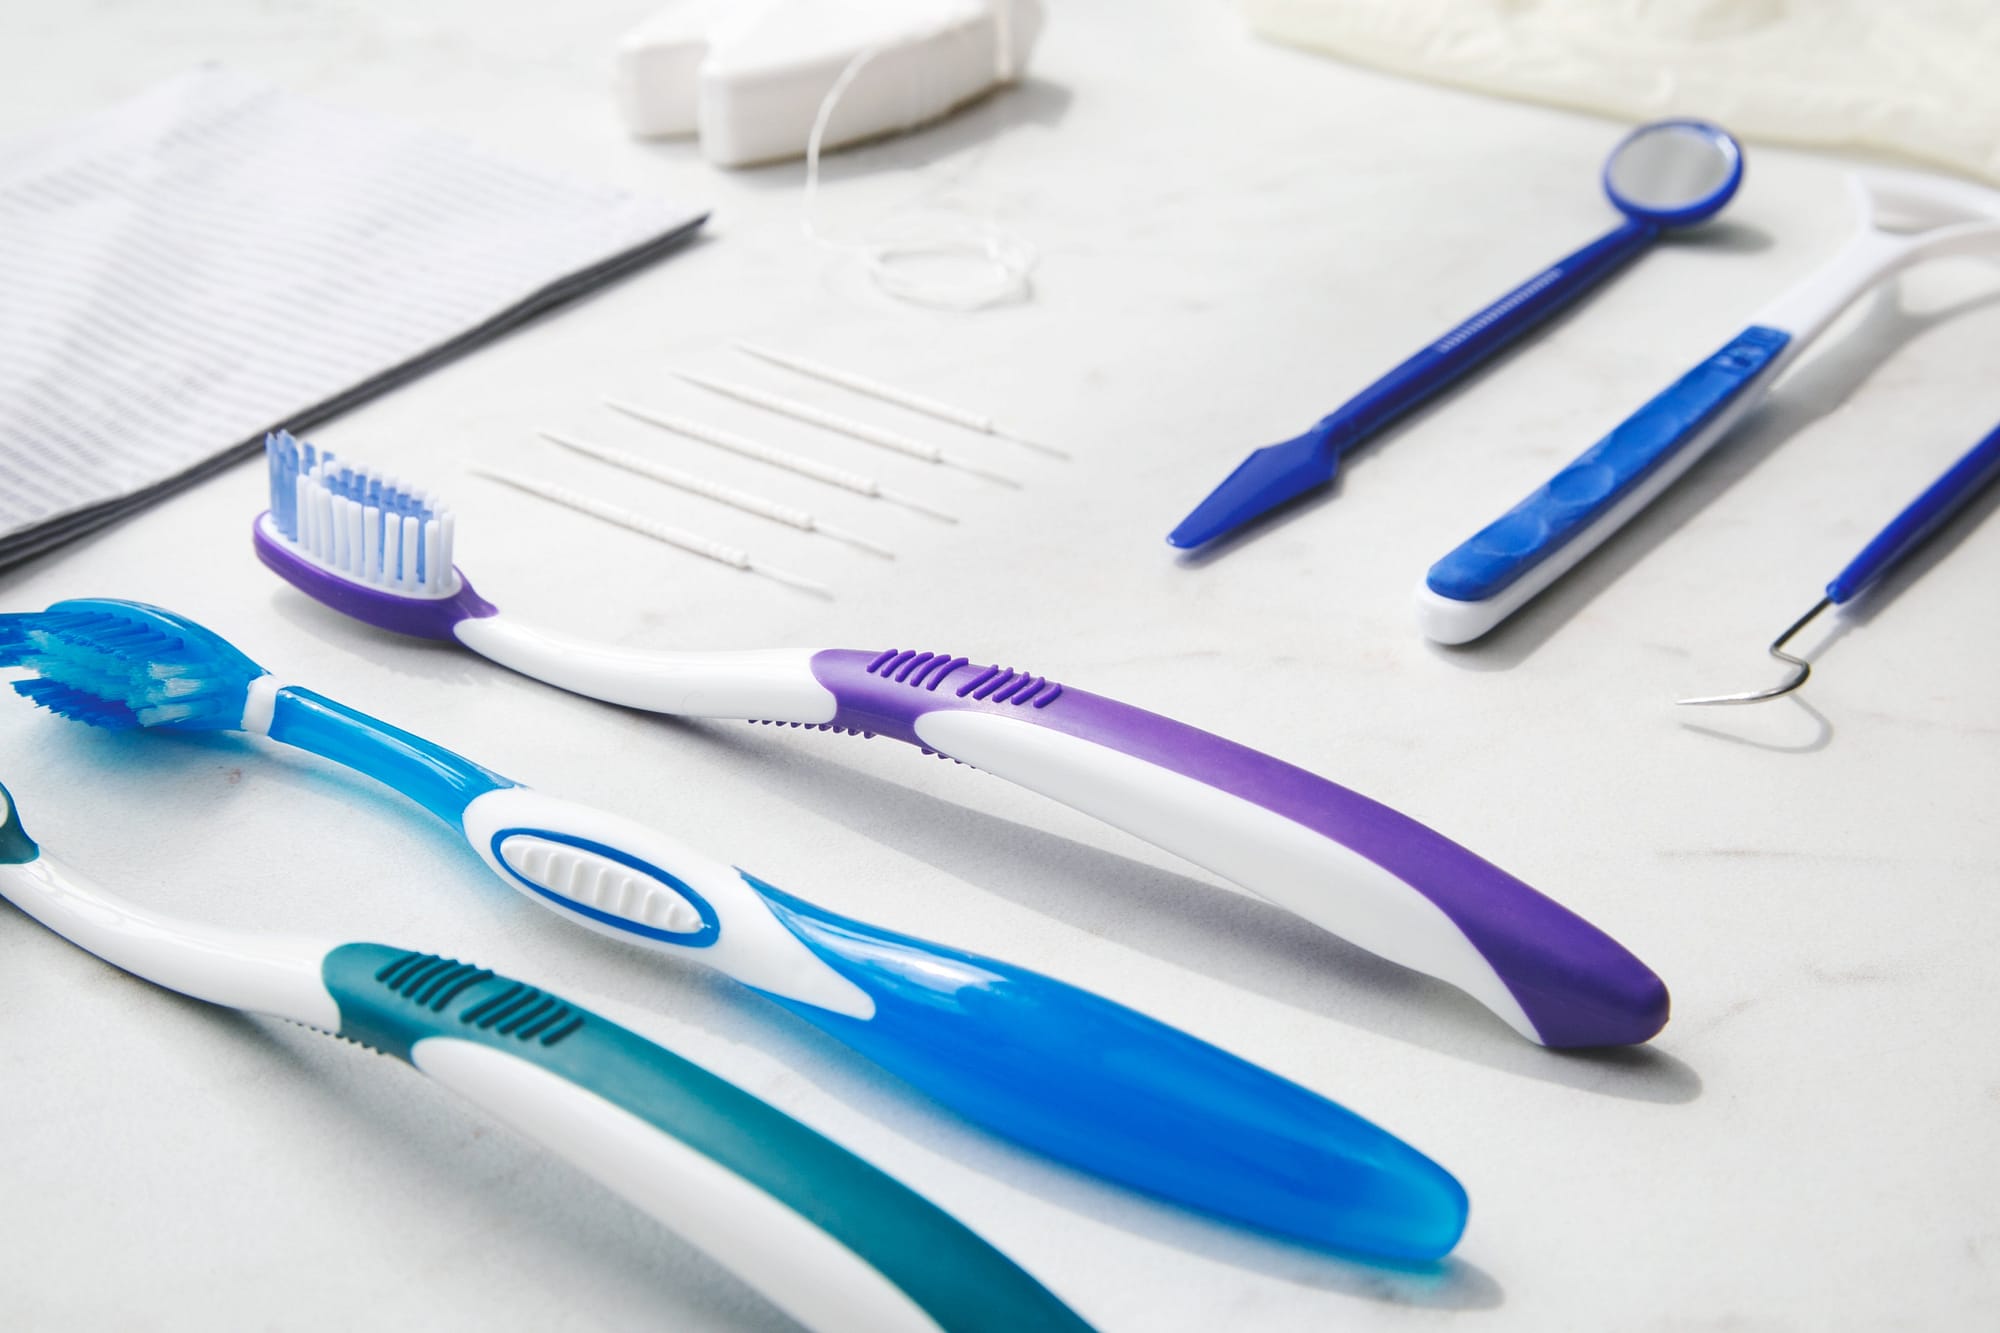 Toothbrush and other tools for dental care